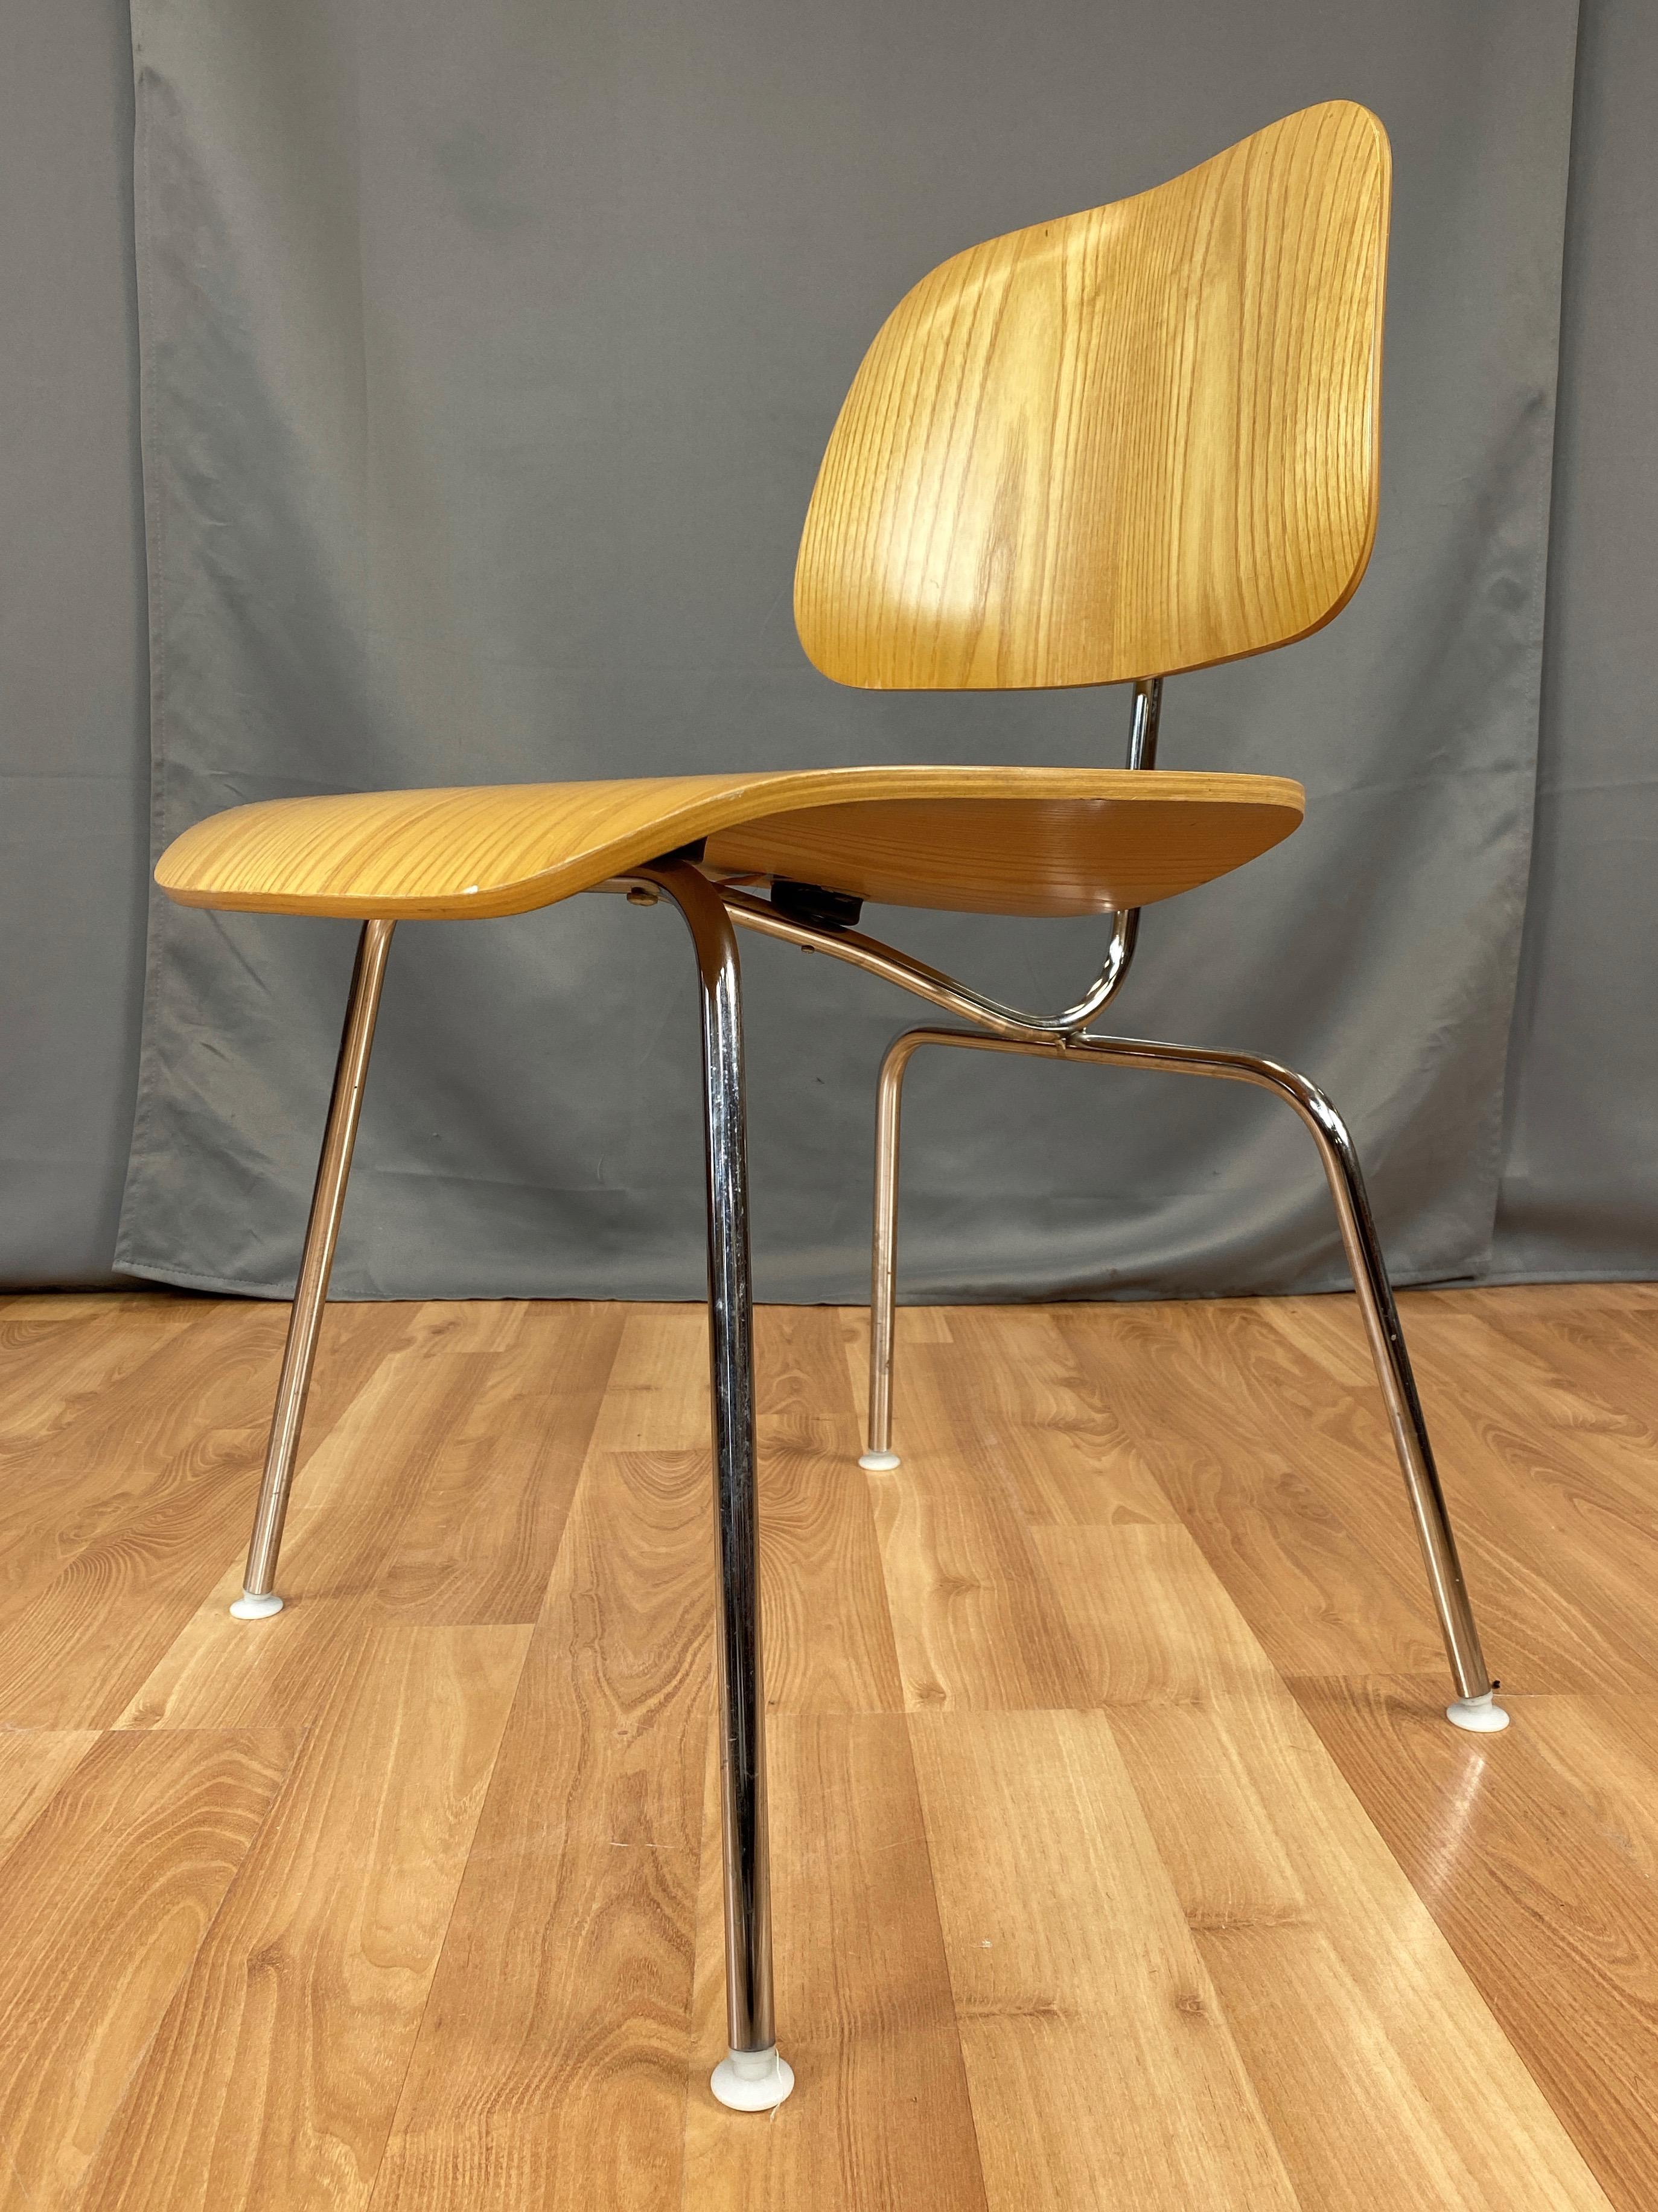 A DCM (Dining Chair Metal) in white ash by Charles and Ray Eames for Herman Miller.

Introduced in 1946, it quickly became a timeless and essential American design Classic. Molded five-ply seat and back on chromed-steel legs. This particular example